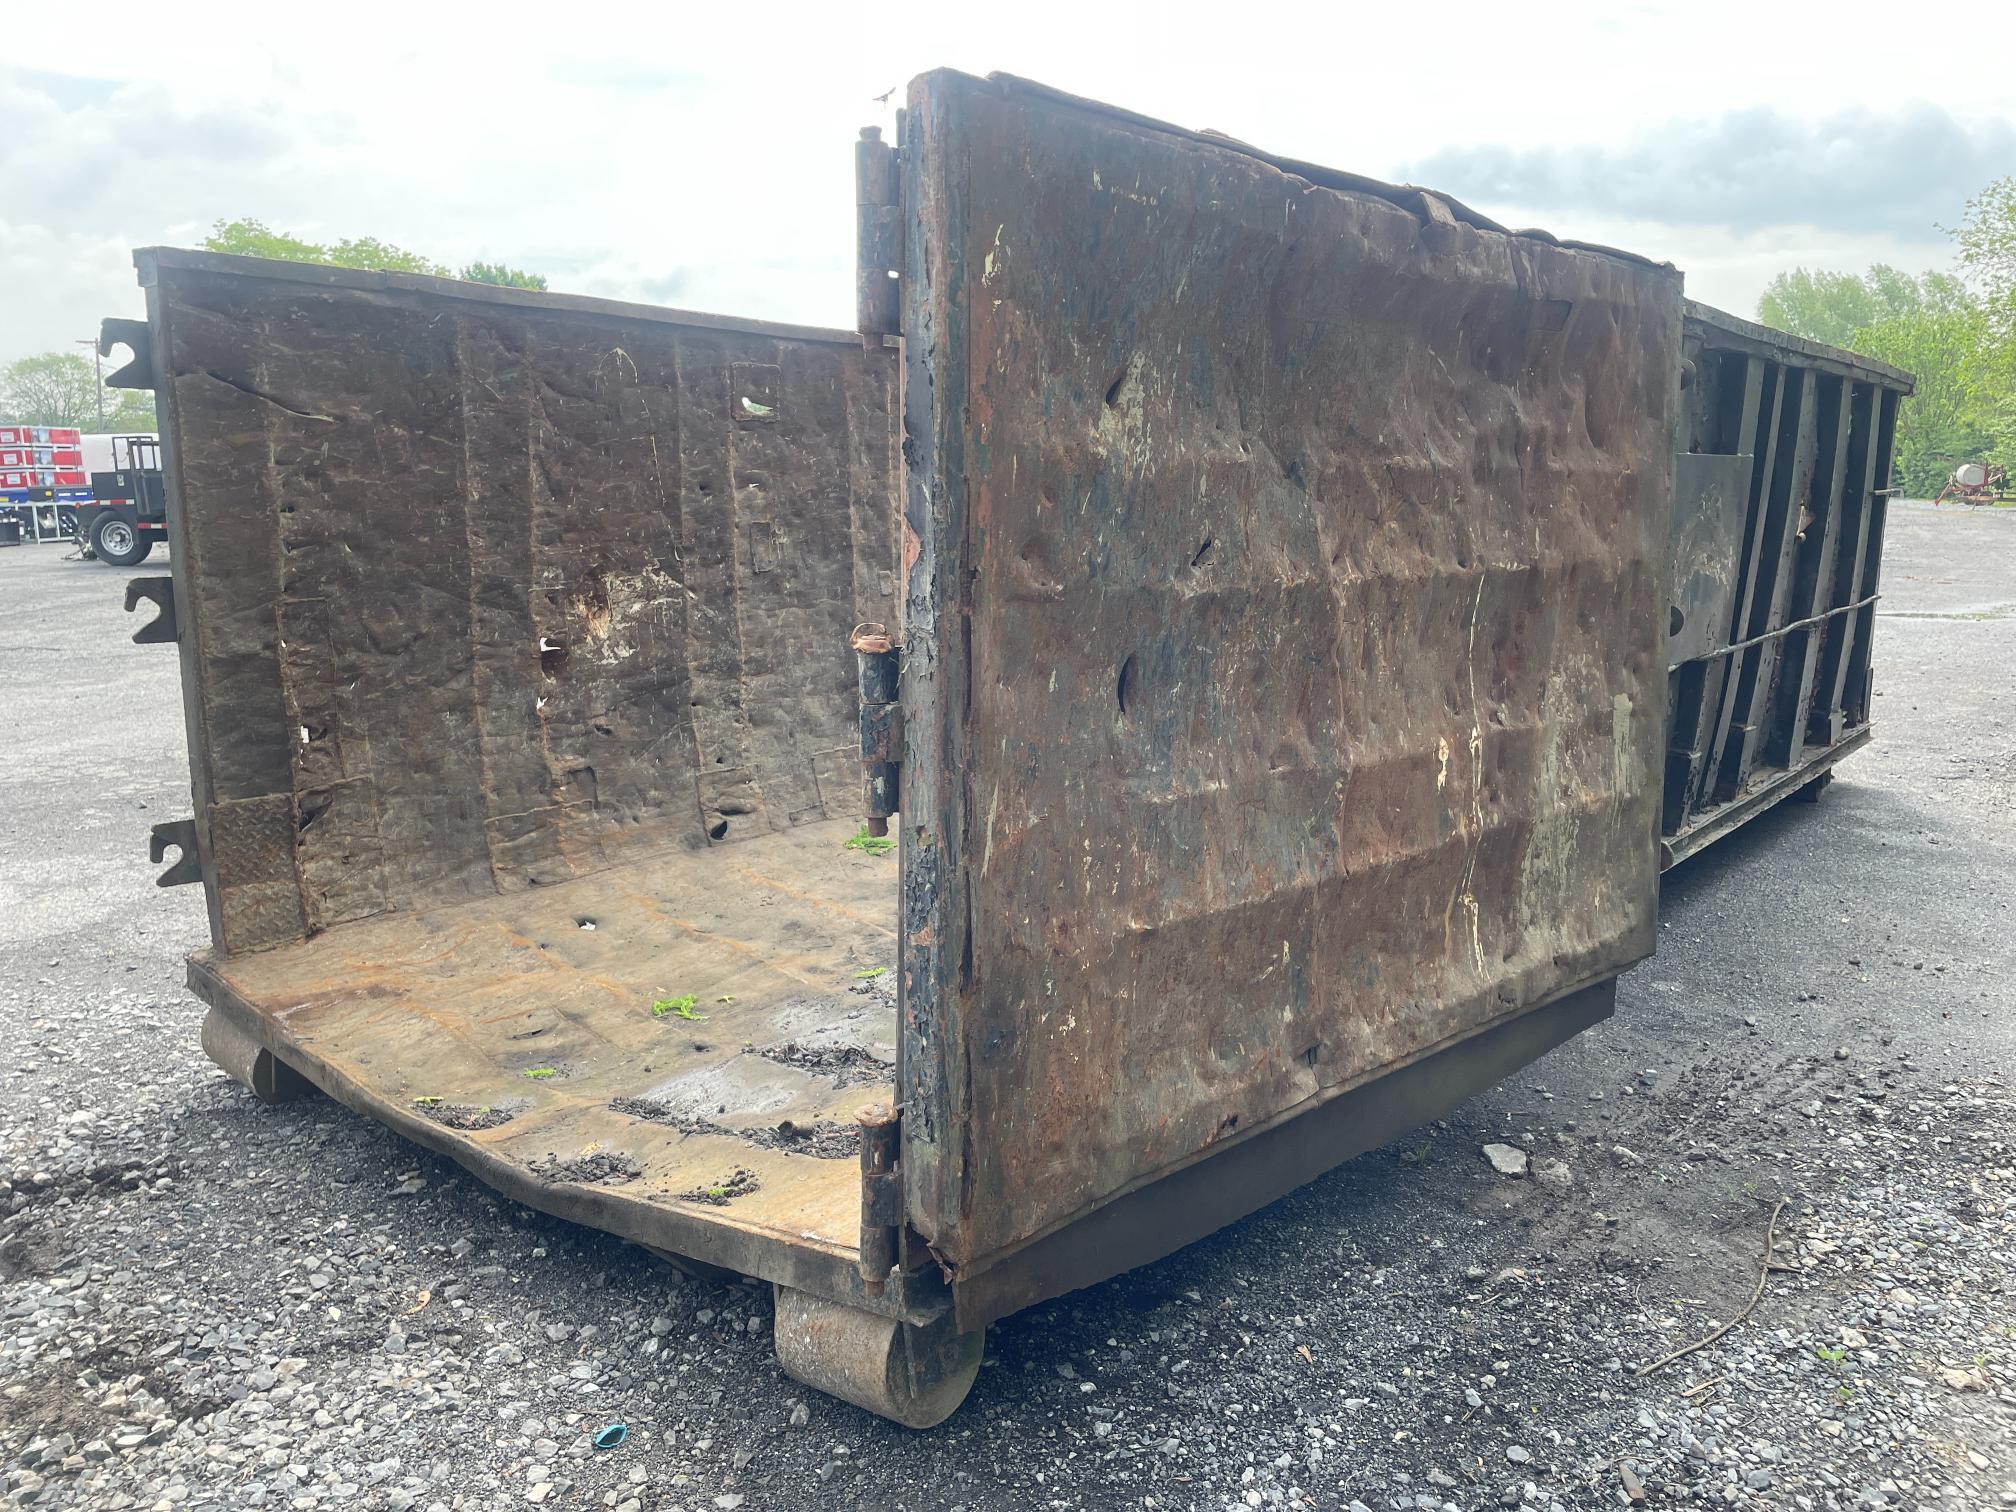 Used 30 Yard Dumpster/Roll Off Container